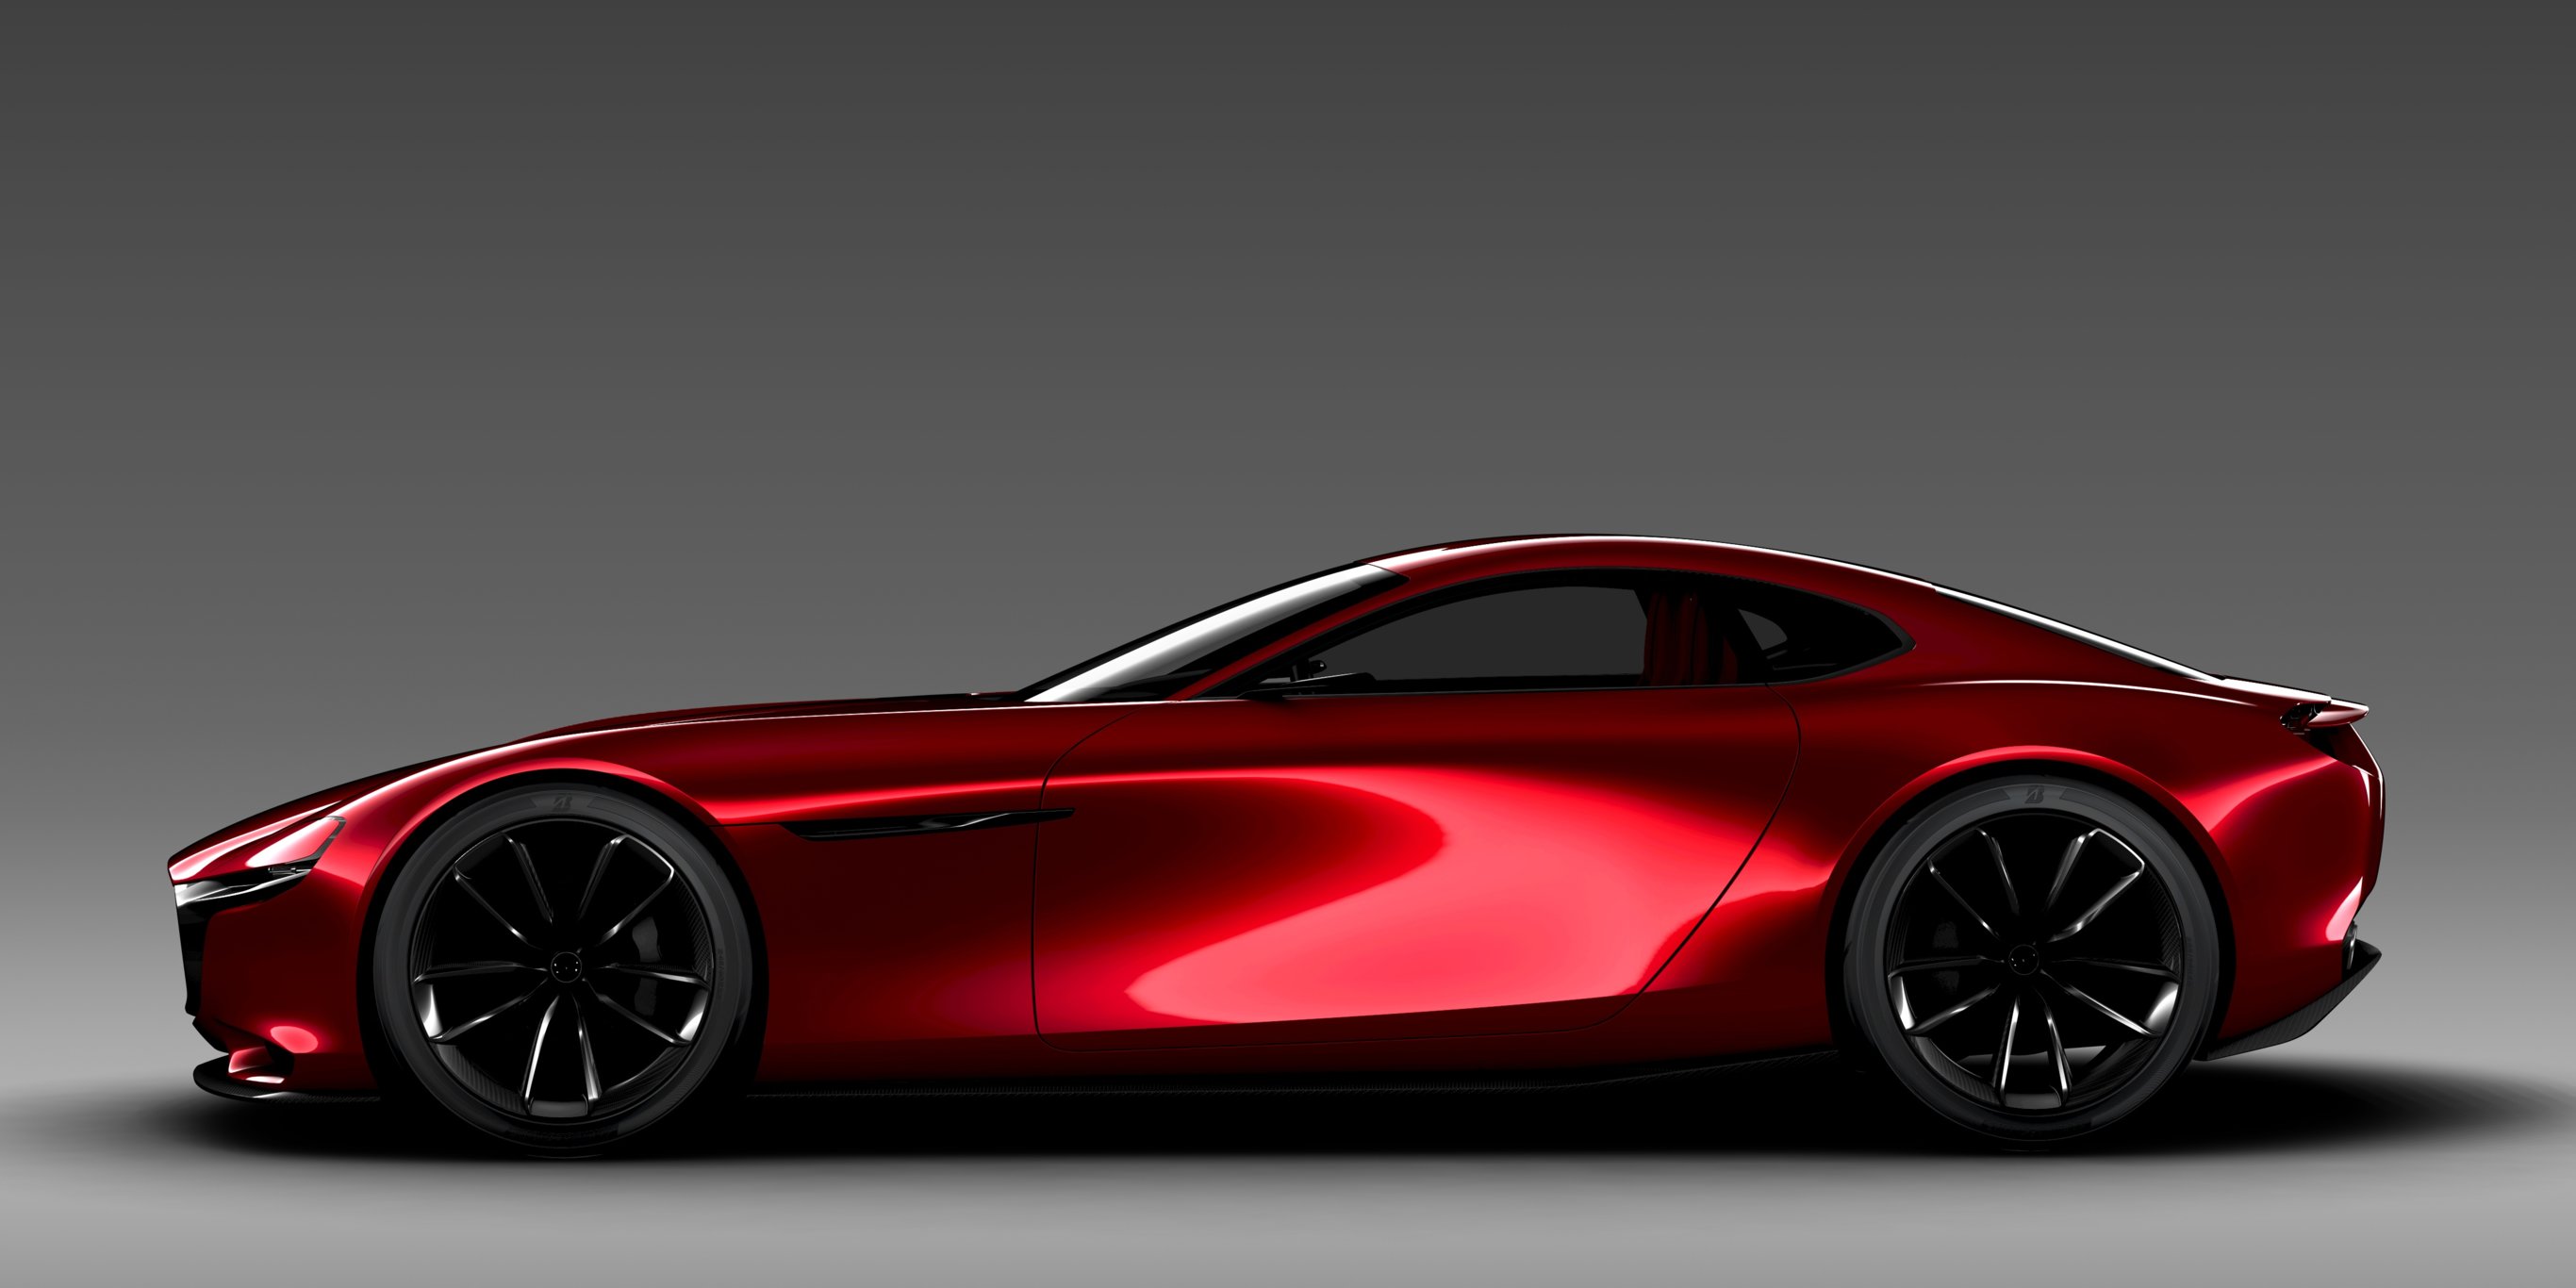 Report: Mazda has approved a new RX sports car - Business Insider